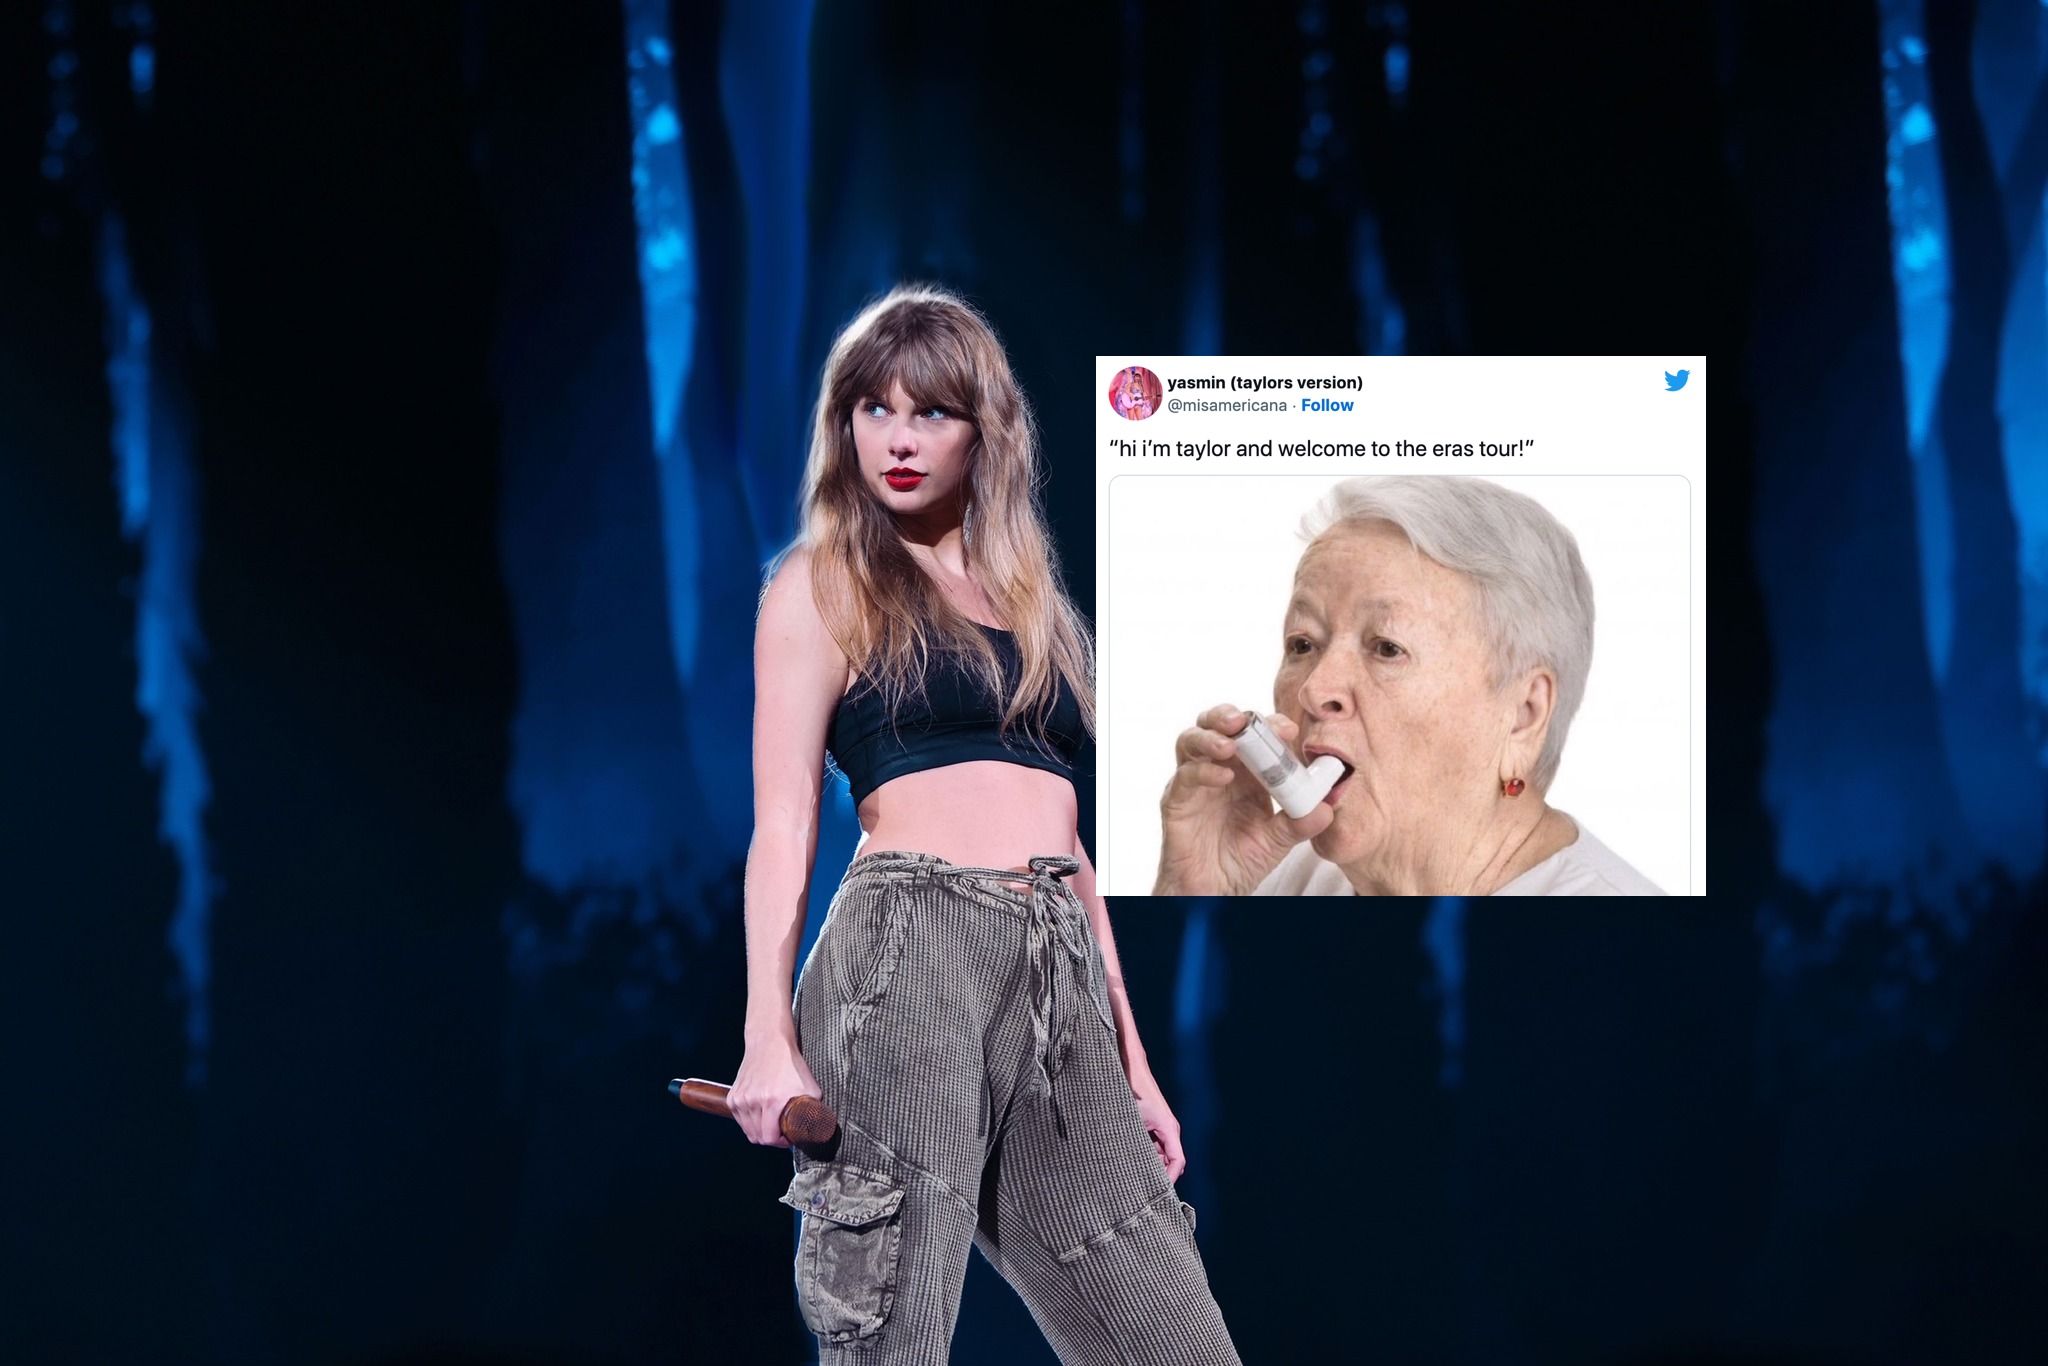 Taylor Swift's Eras tour: The best reactions and memes on Twitter